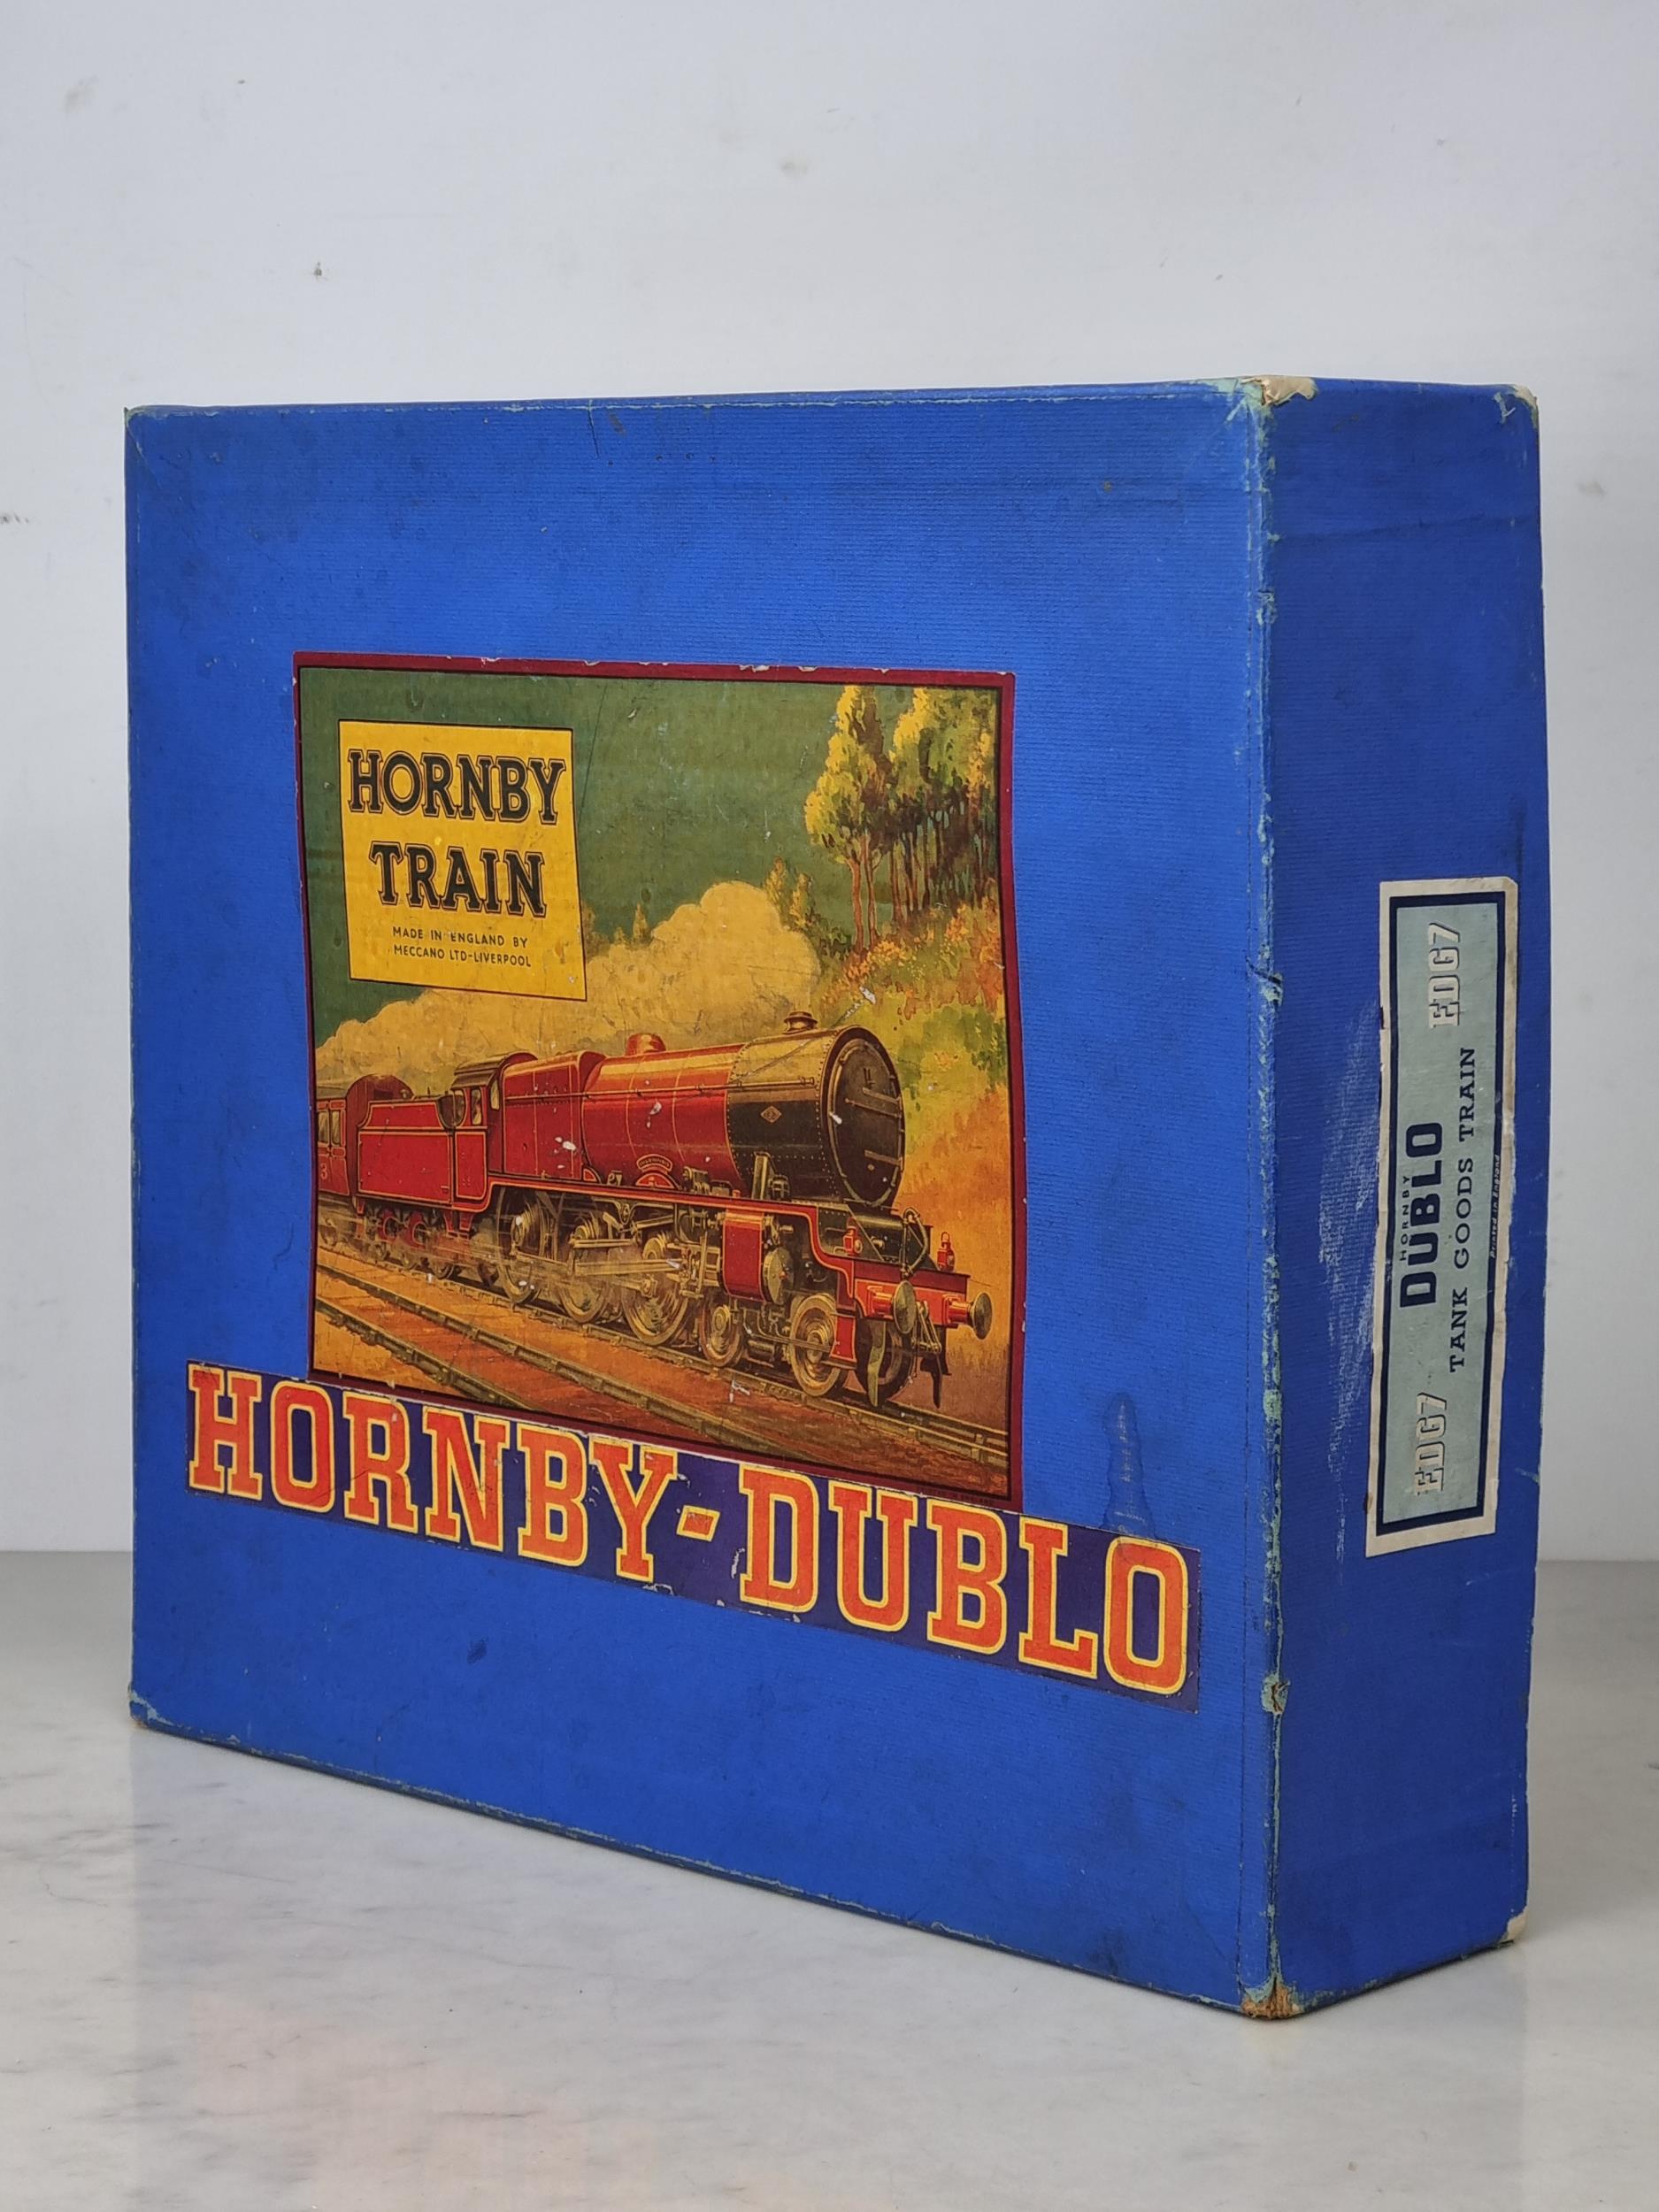 A boxed Hornby Dublo EDG7 Royal Scot LNER Goods Set, locomotive and wagons in mint condition,